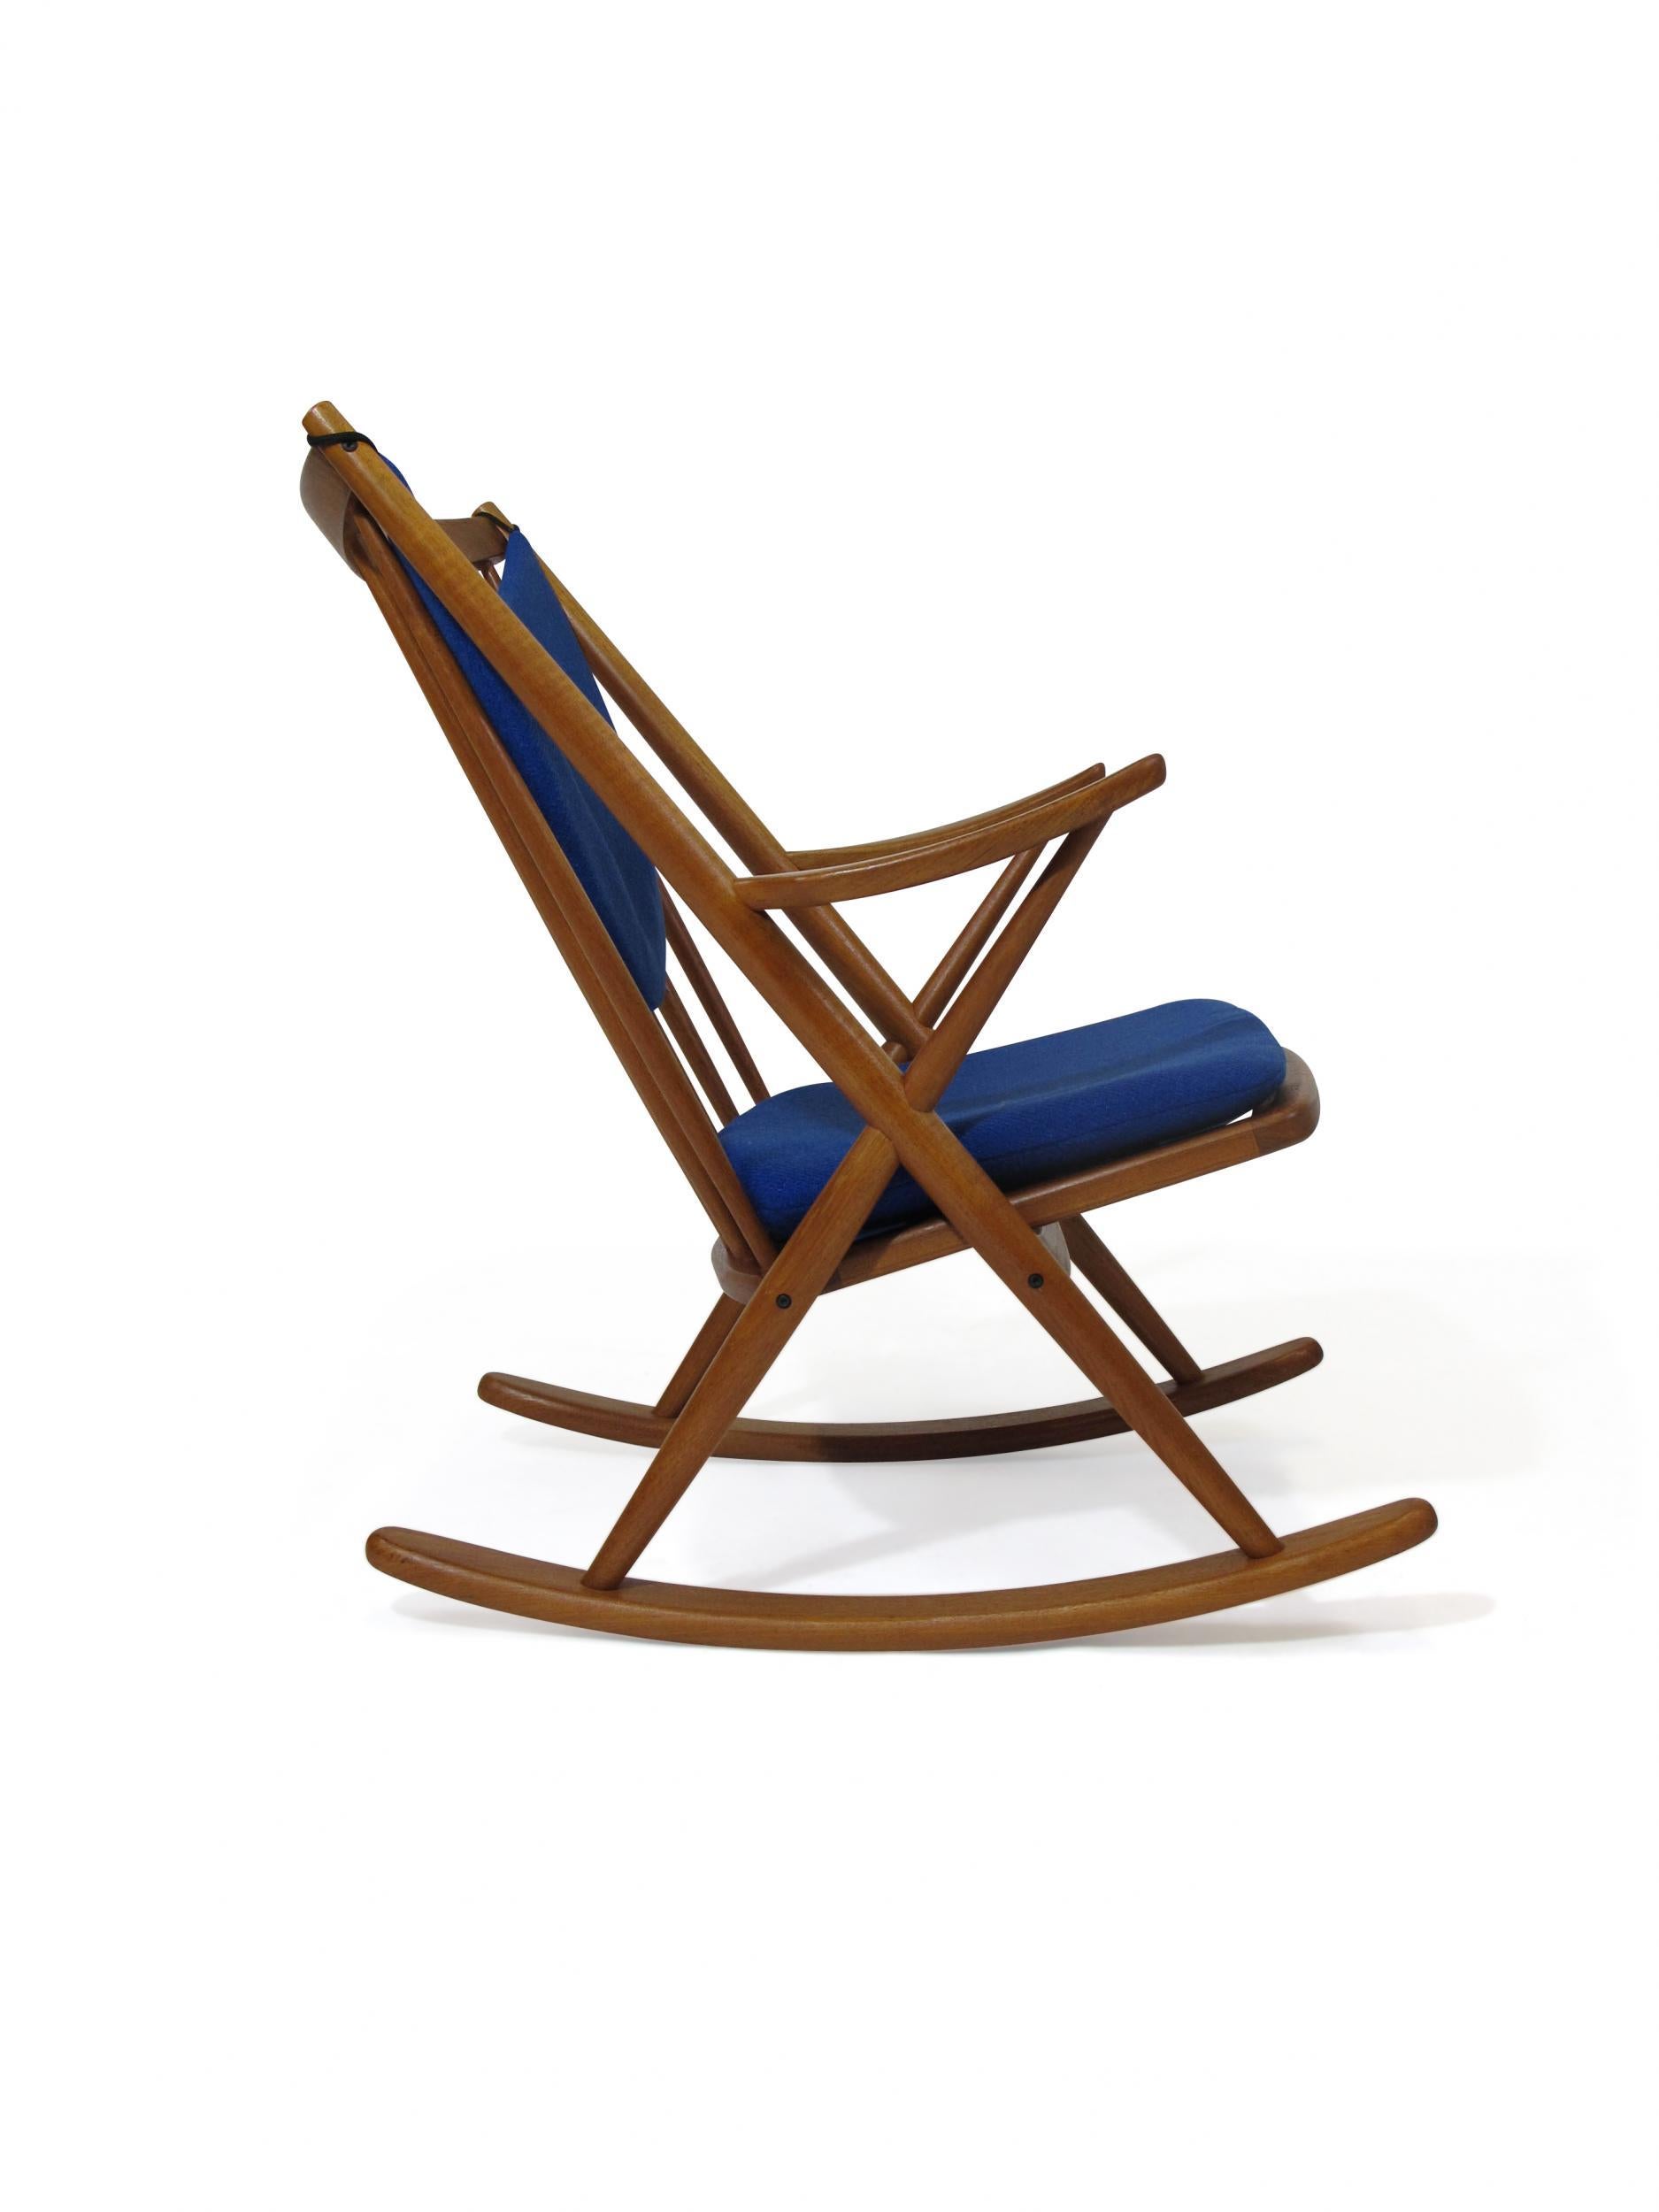 Danish teak rocking chair designed by Frank Reenskaug for Bramin Model 182, circa 1958, Denmark. The rocking chair is crafted of a solid teak frame with spindle backrest, sculpted armrest, and upholstered cushions in the original navy blue wool